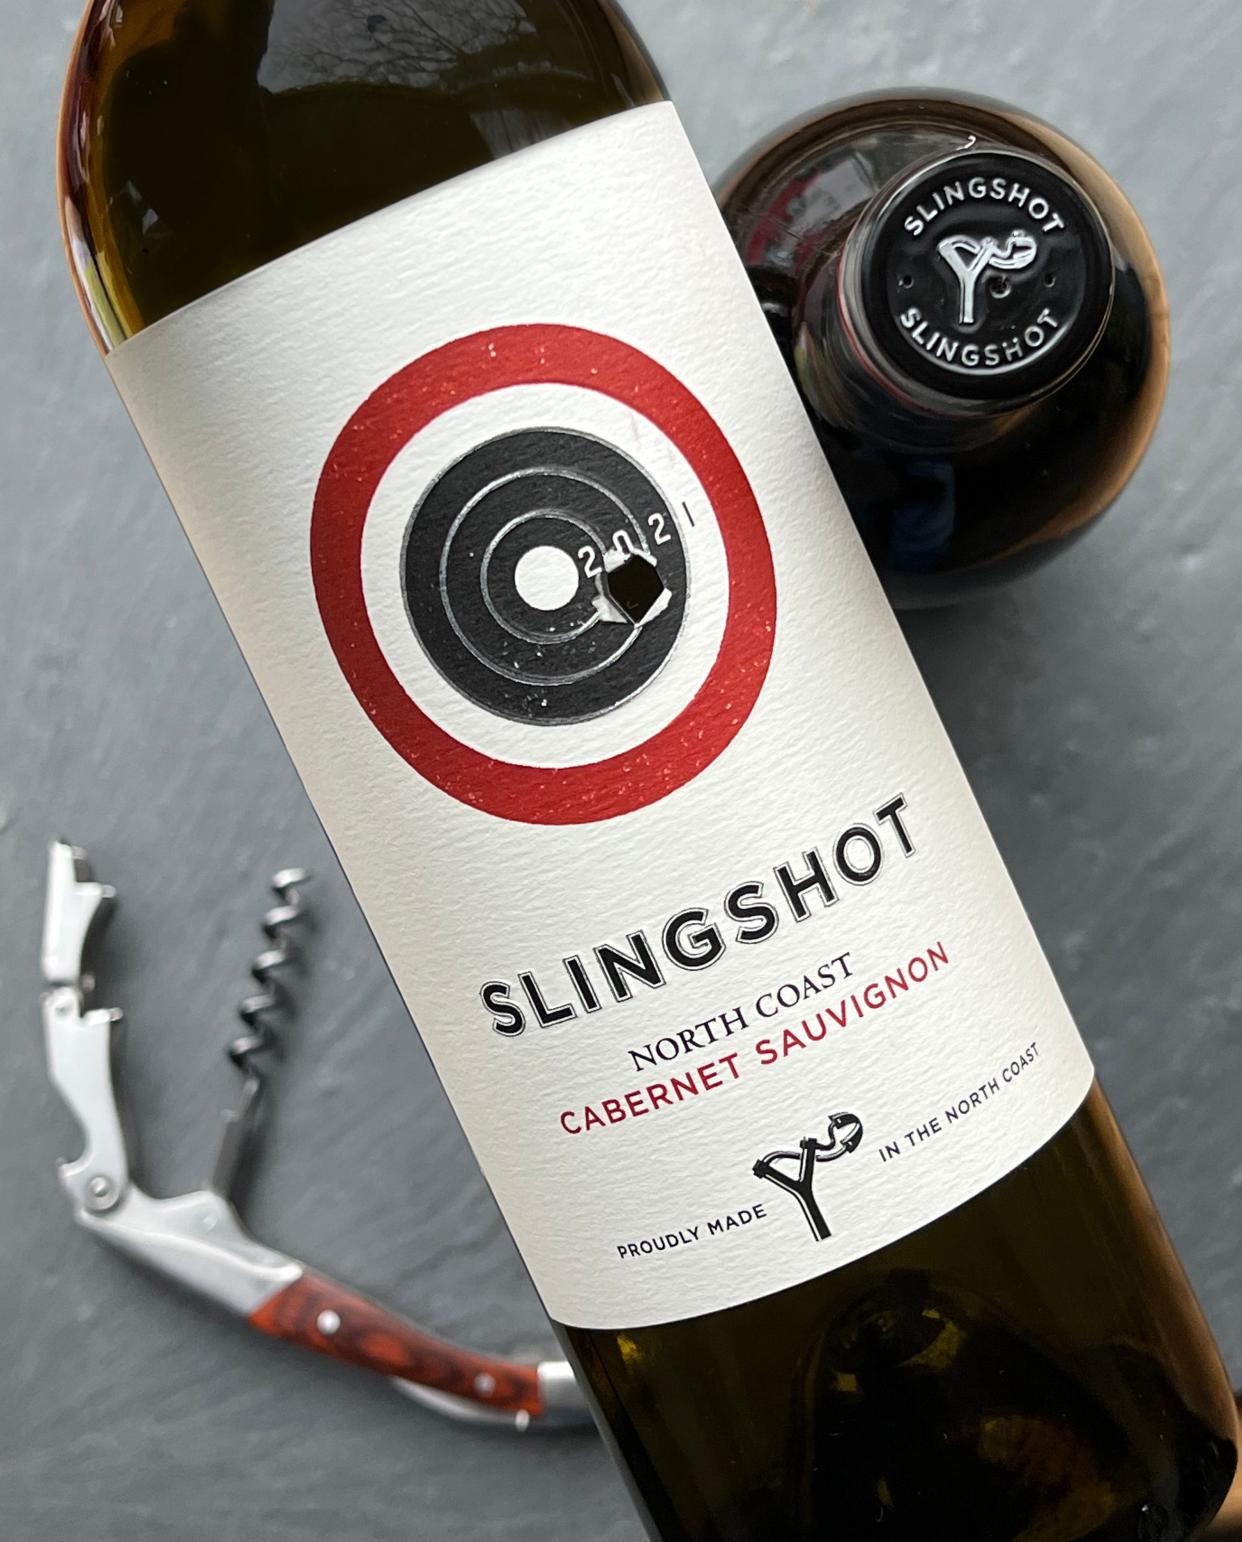 Slingshot cabernet from California's North Coast.